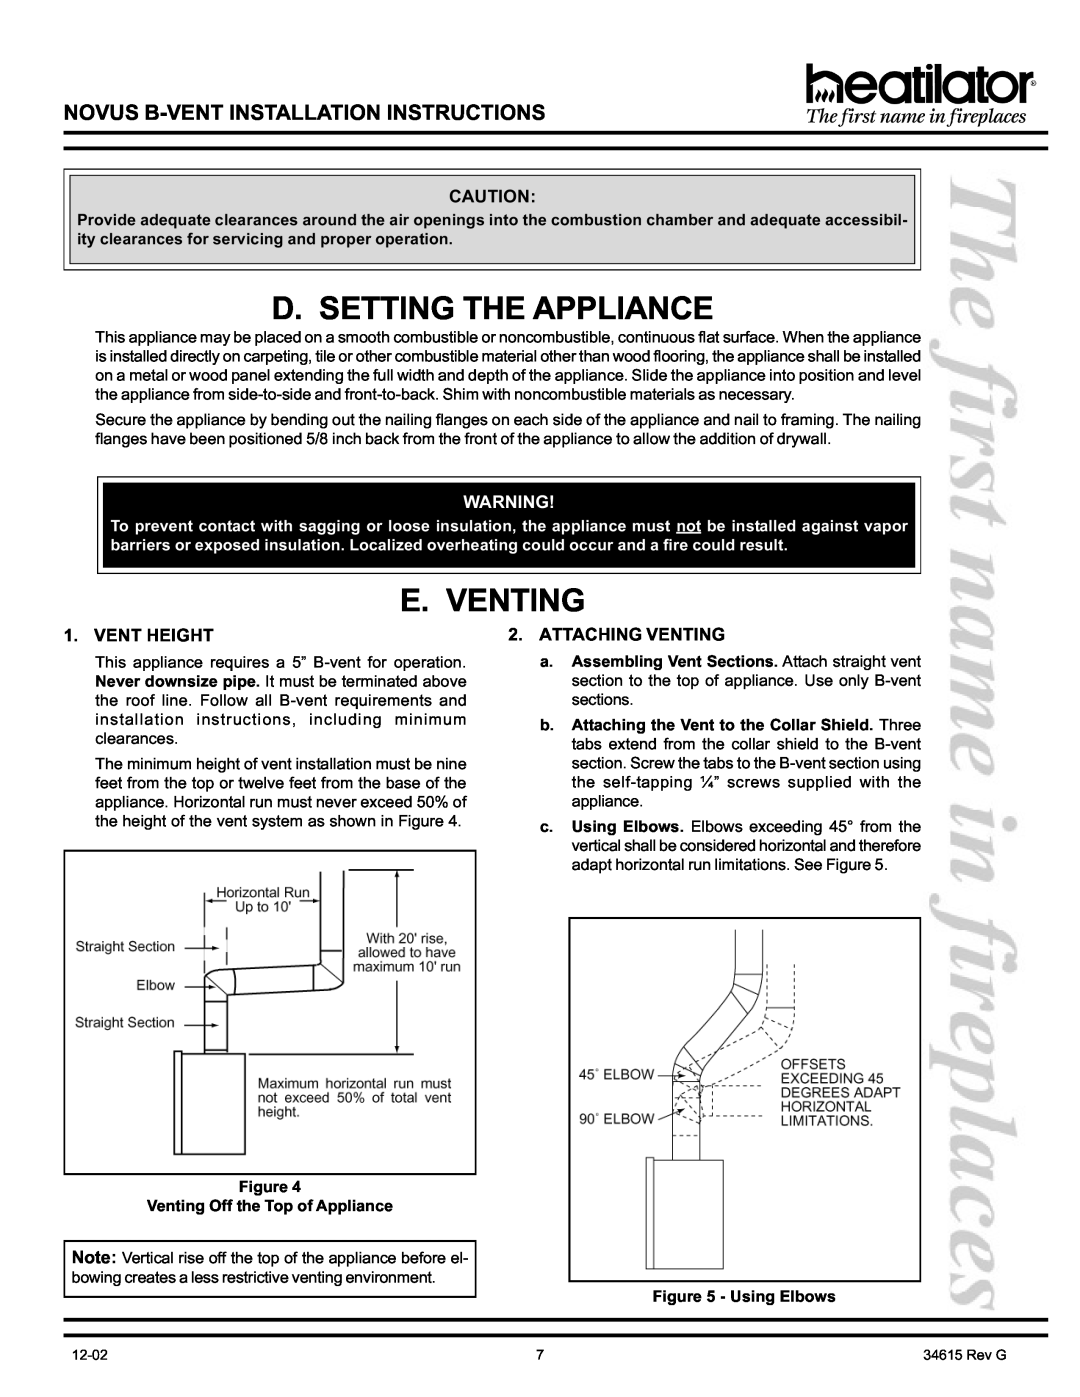 Hearth and Home Technologies GNBC36 D. Setting The Appliance, E. Venting, Vent Height, Attaching Venting, Using Elbows 